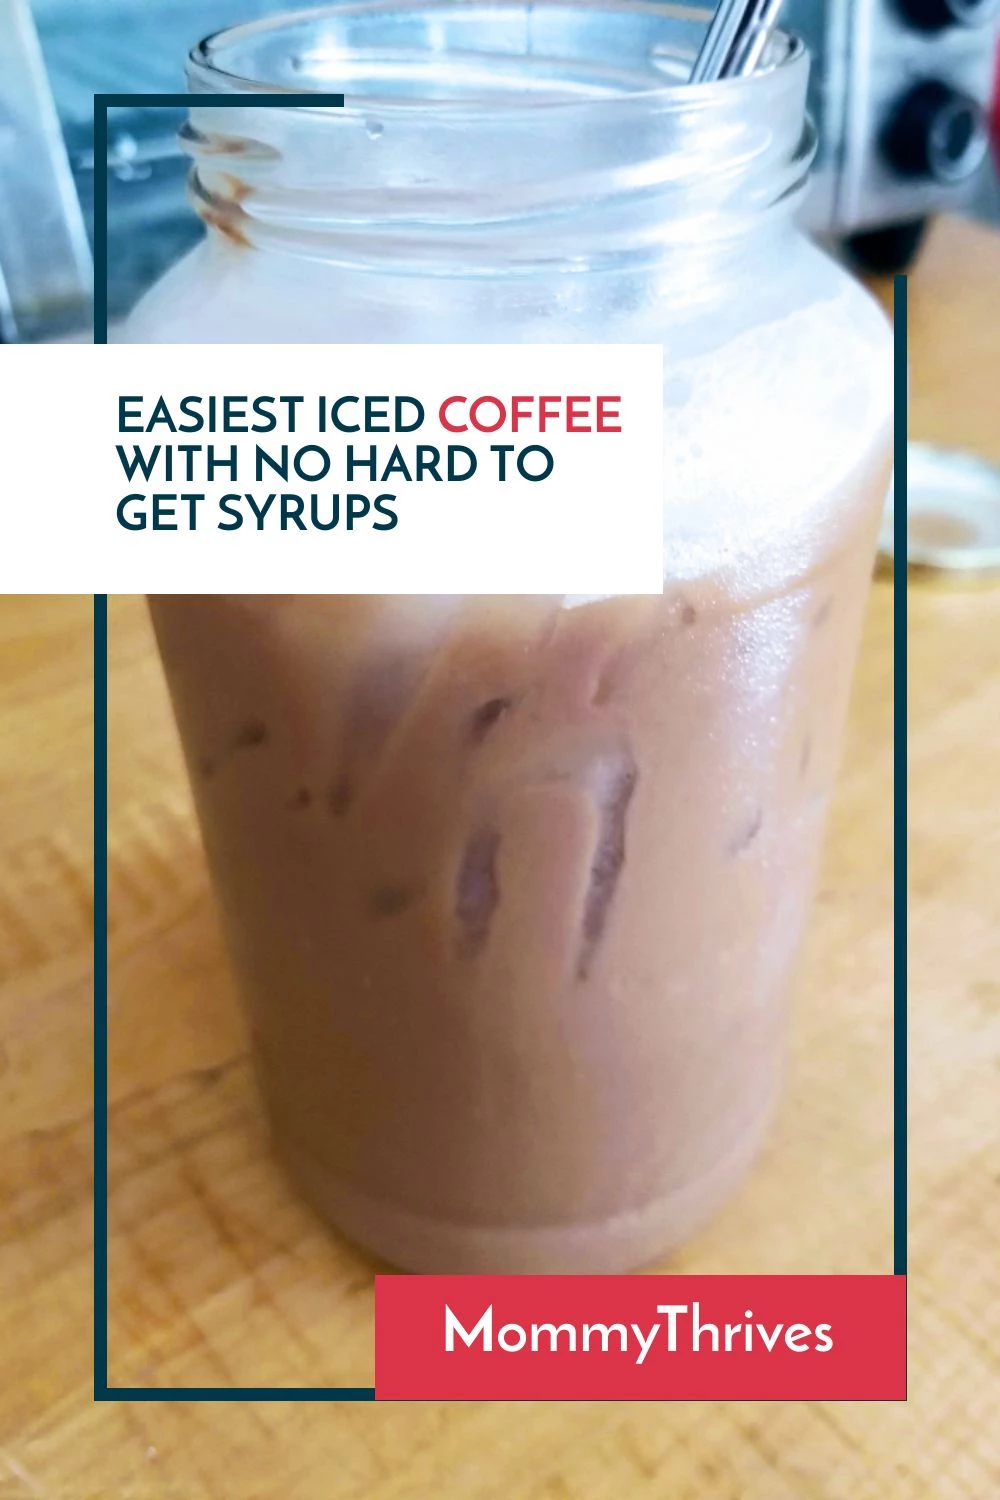 HOW TO MAKE ICED COFFEE (QUICK AND EASY RECIPE) 